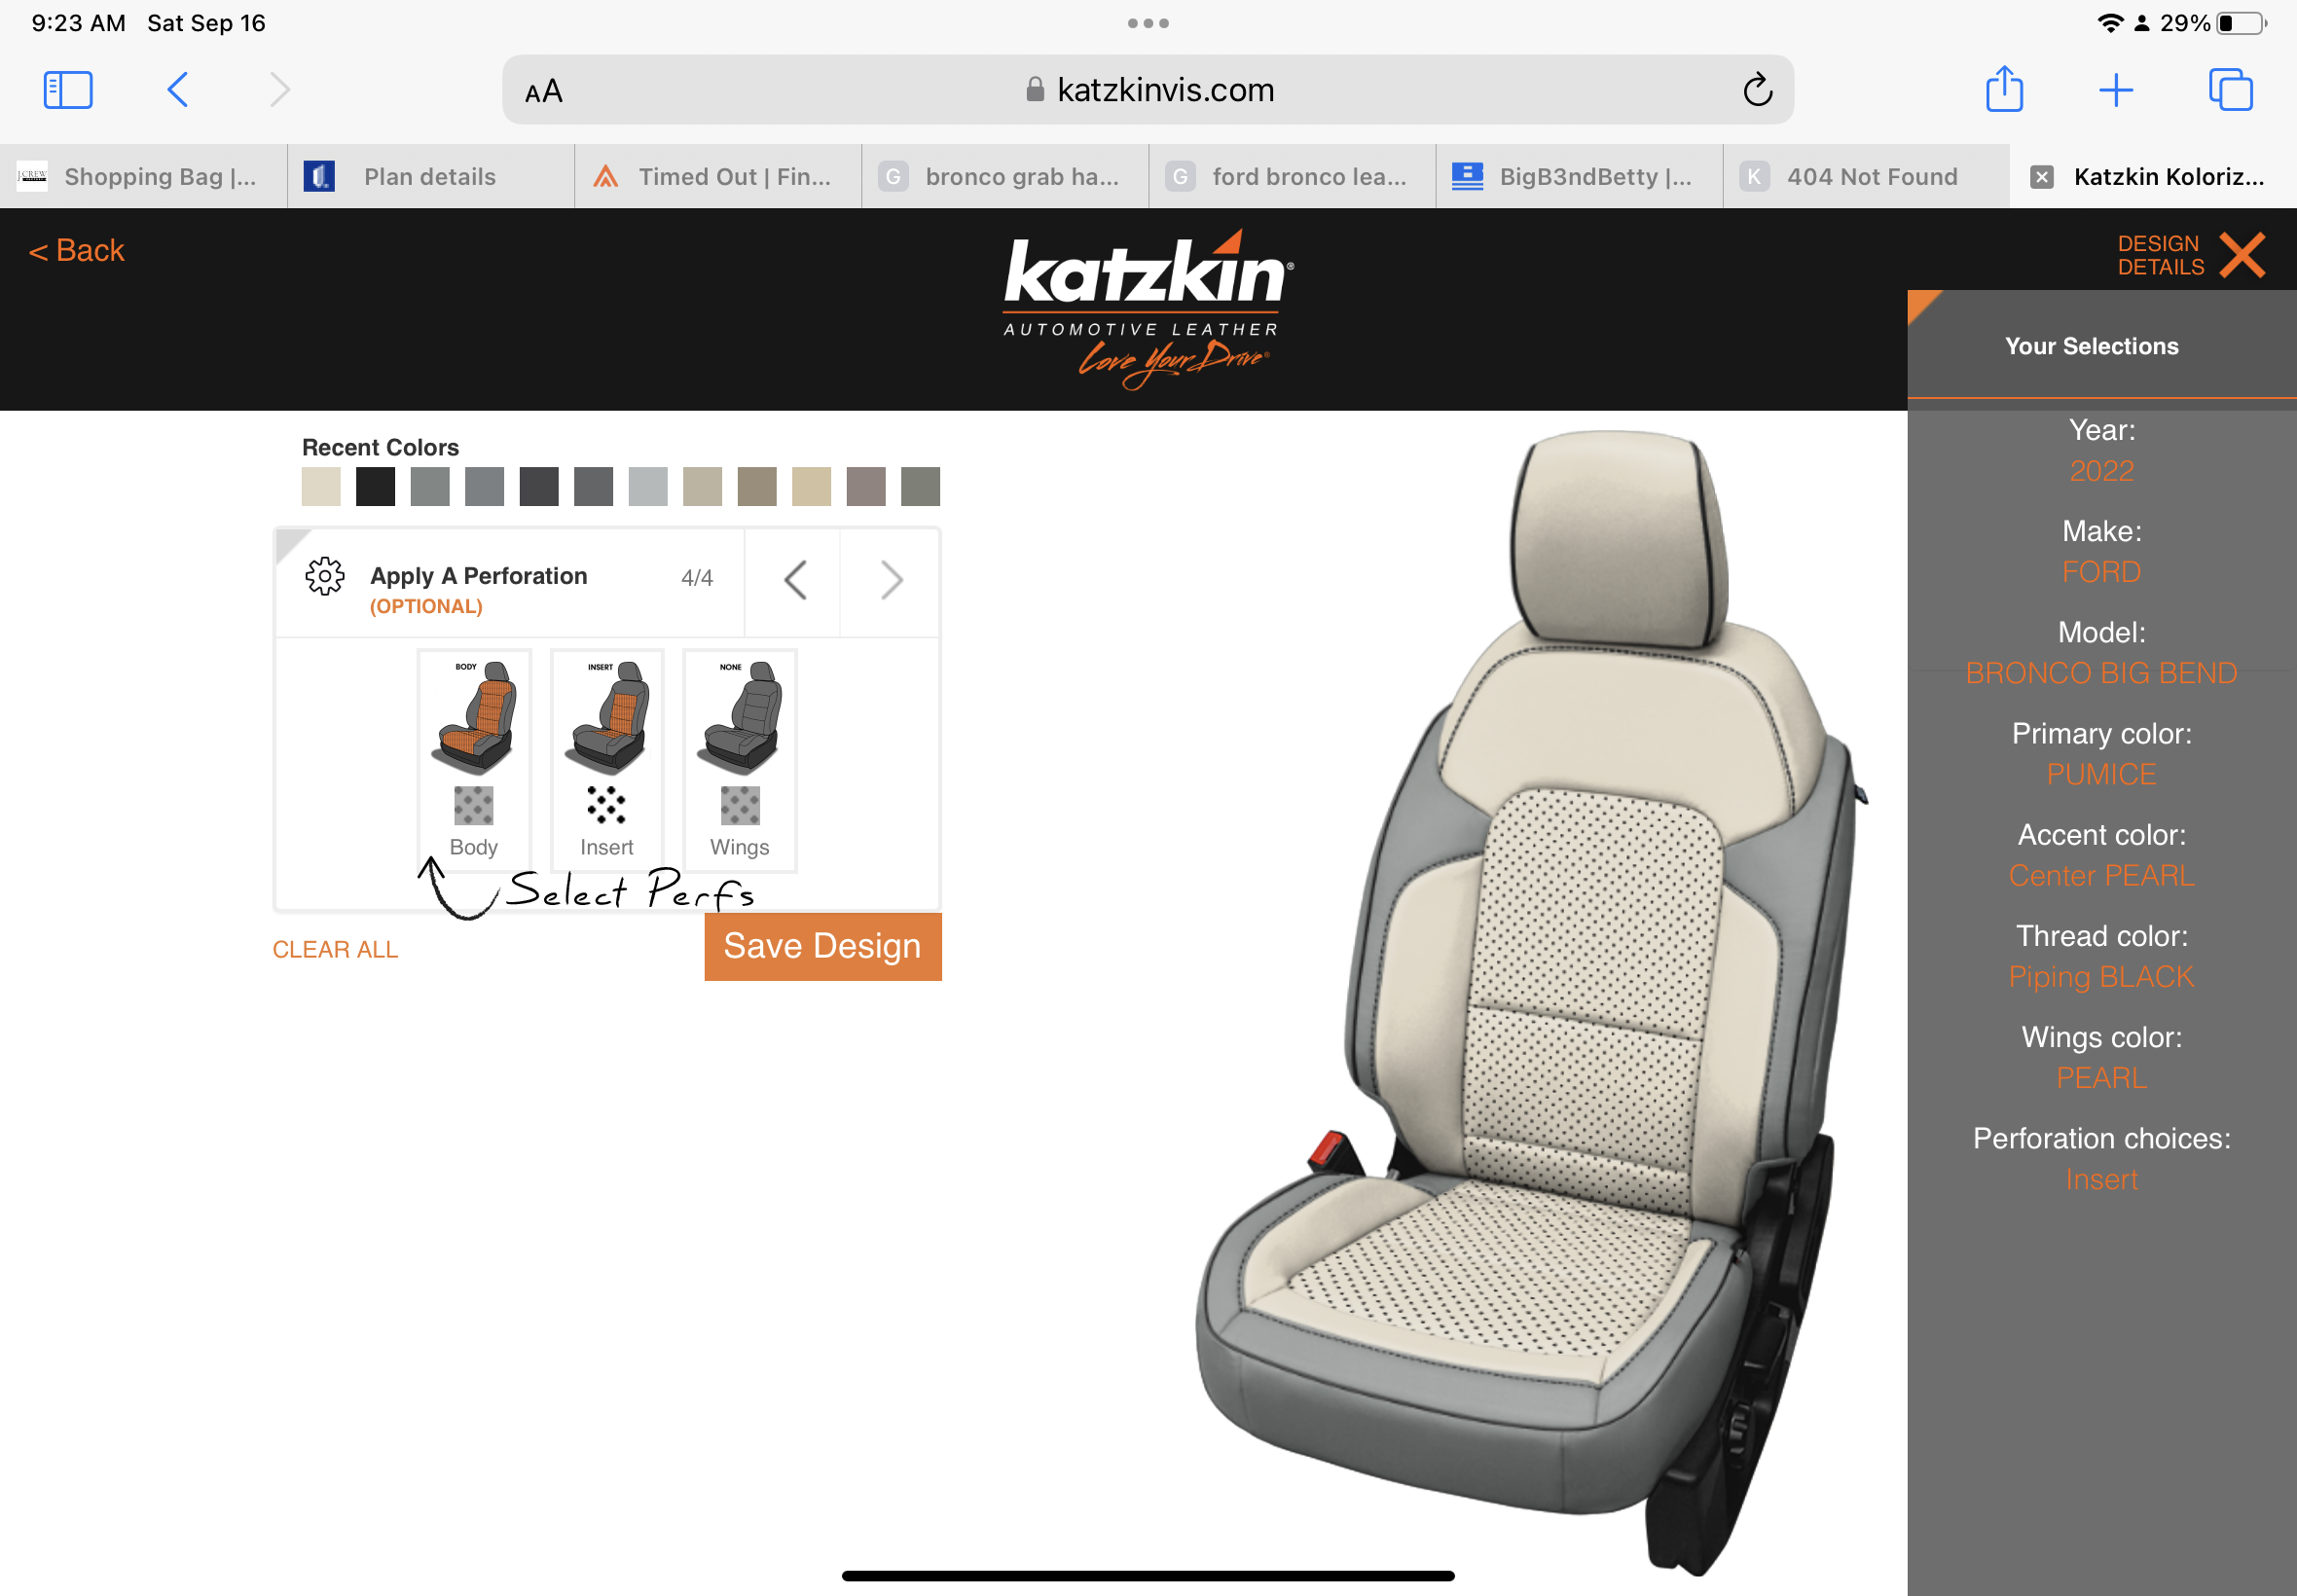 Ford Bronco Trying to pick Katzkin Seat Colors/Design 1694886390240